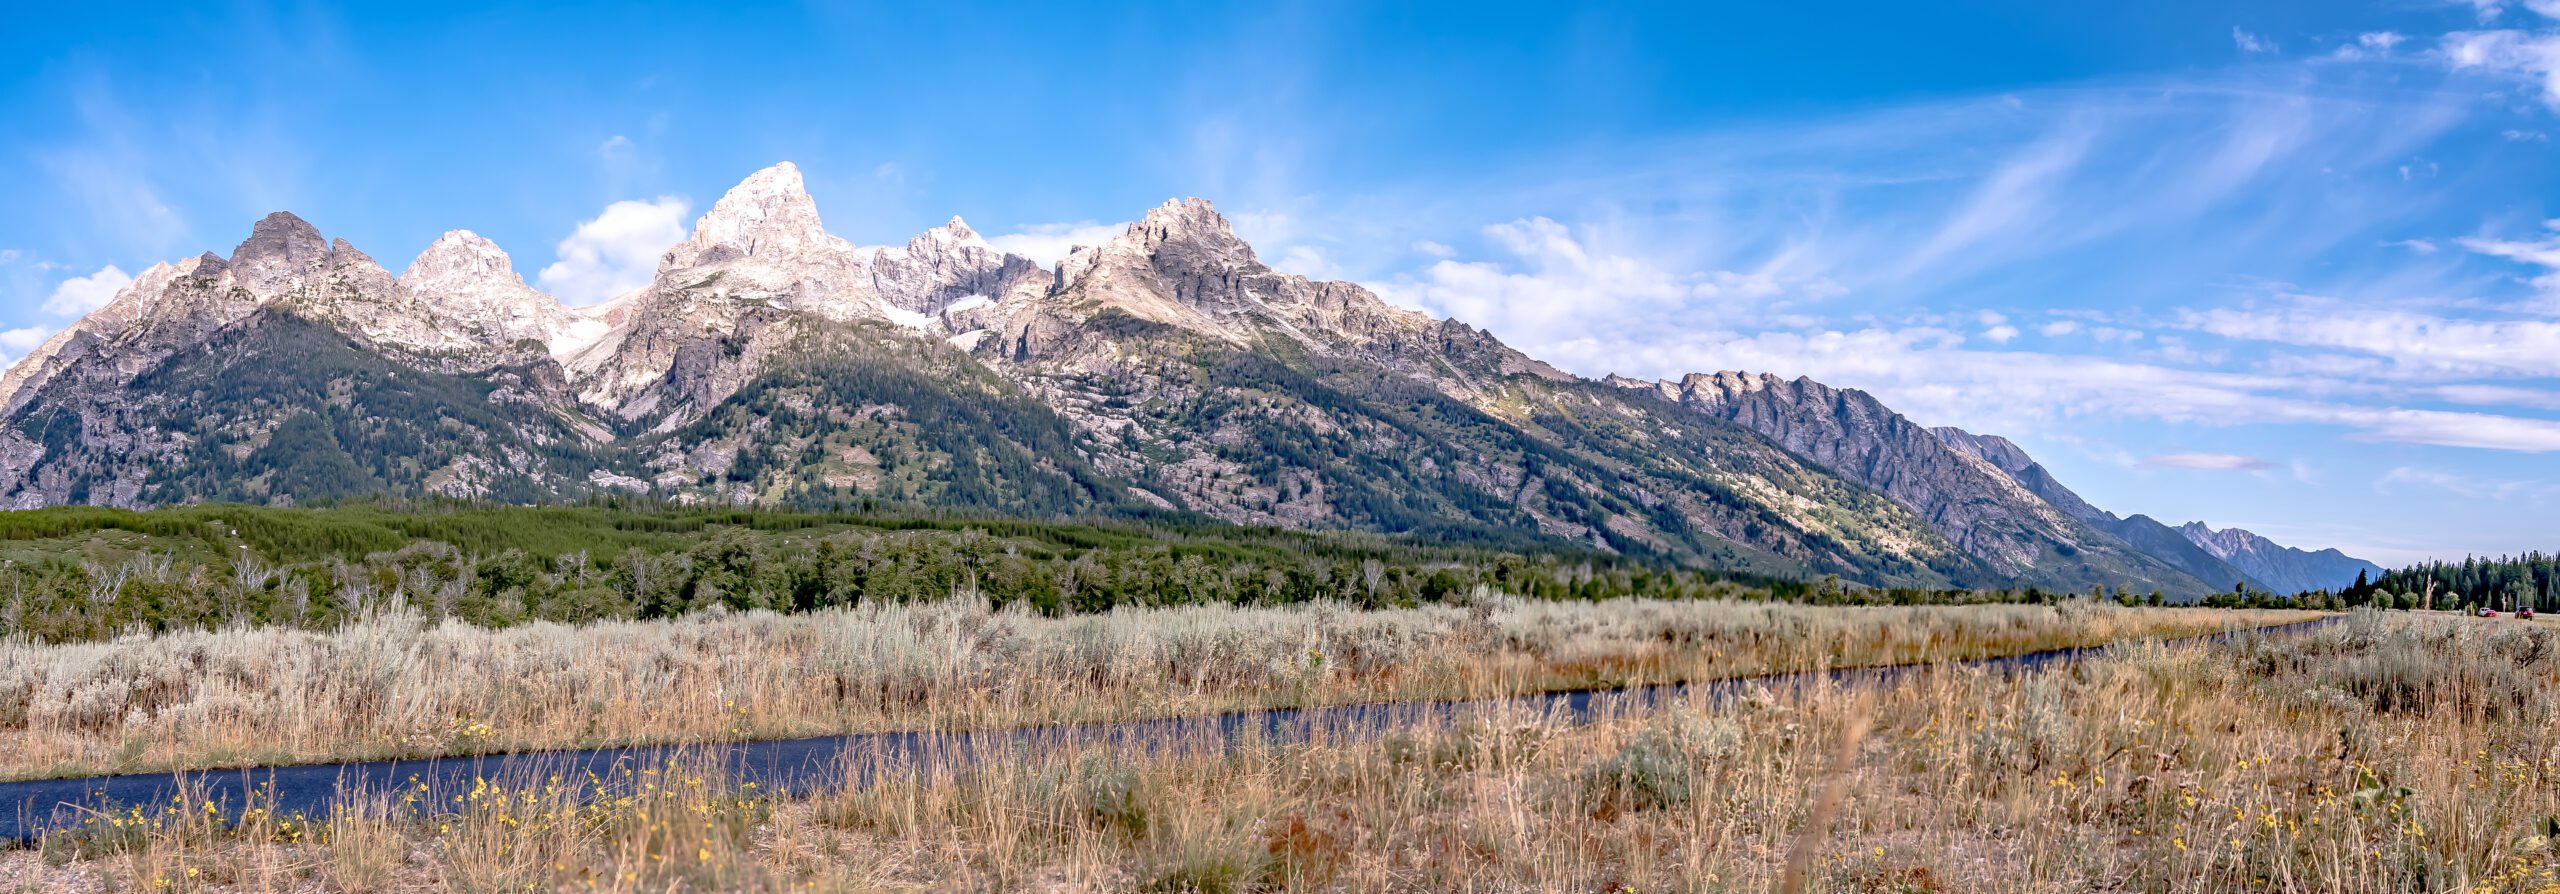 grand teton national park in wyoming early morning